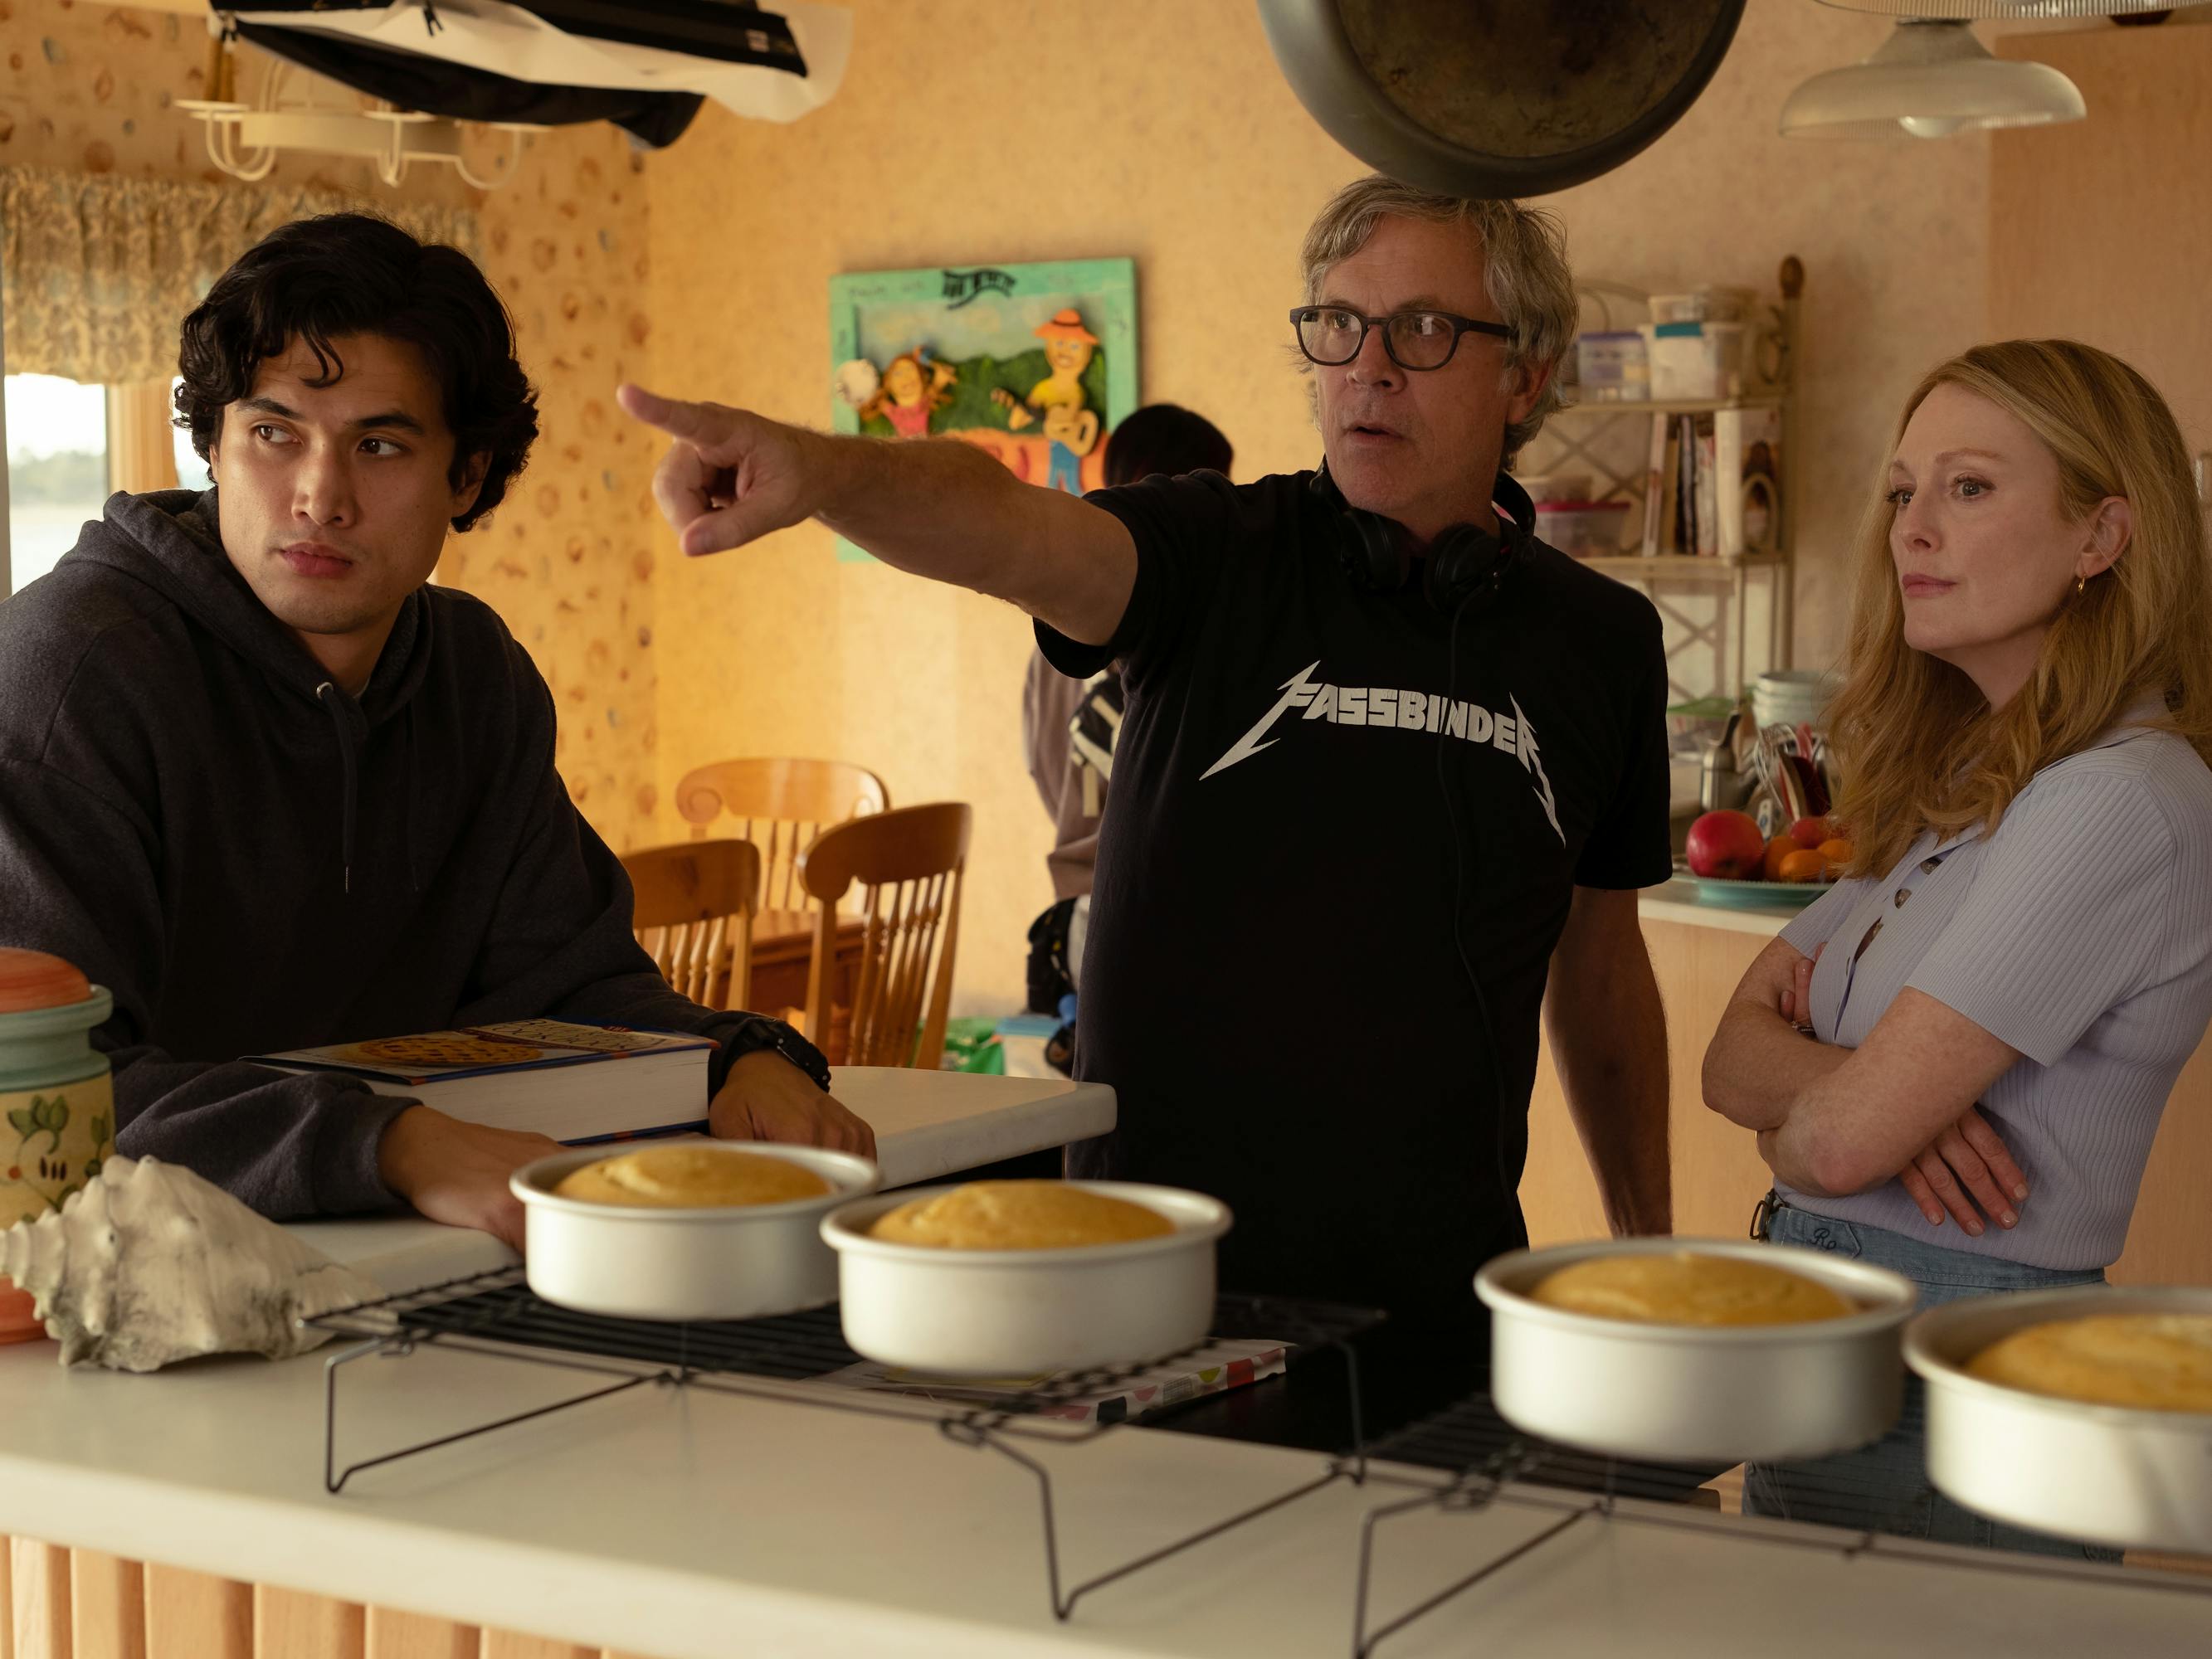 Charles Melton, Todd Haynes, and Julianne Moore behind the scenes in the kitchen. In front of them sit four cakes.